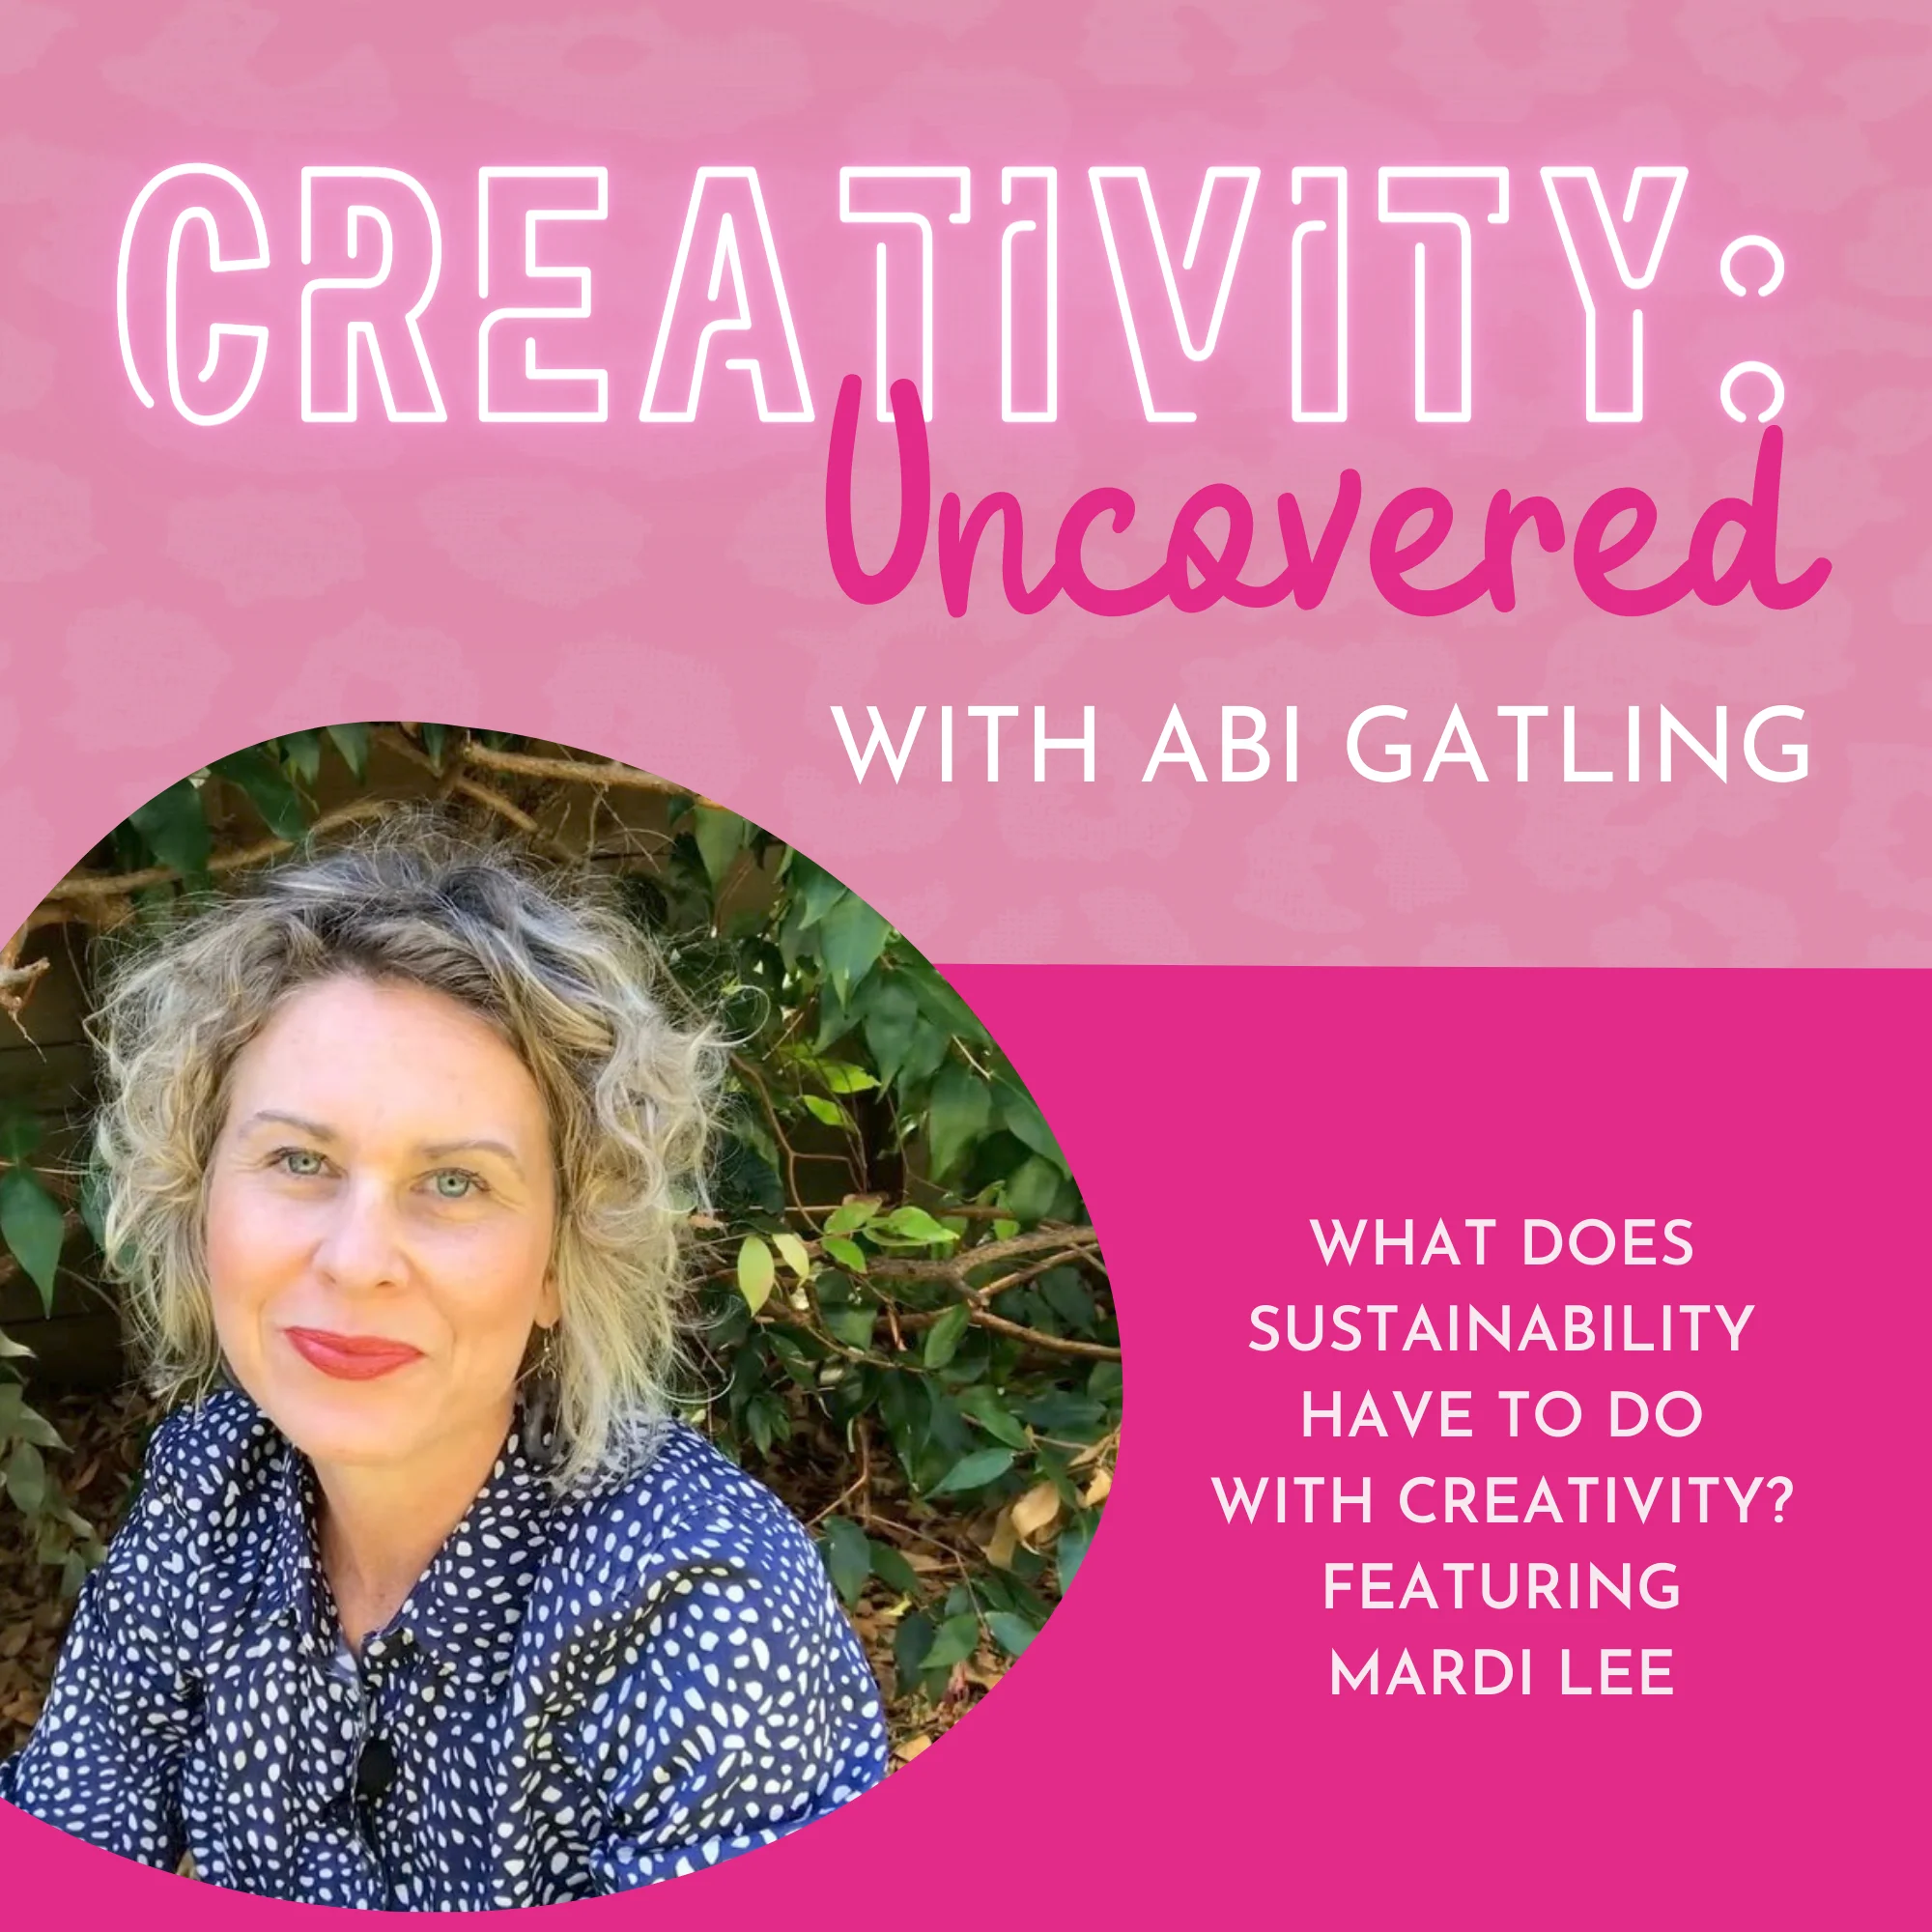 Creativity: Uncovered podcast episode graphic featuring guest Mardi Lee